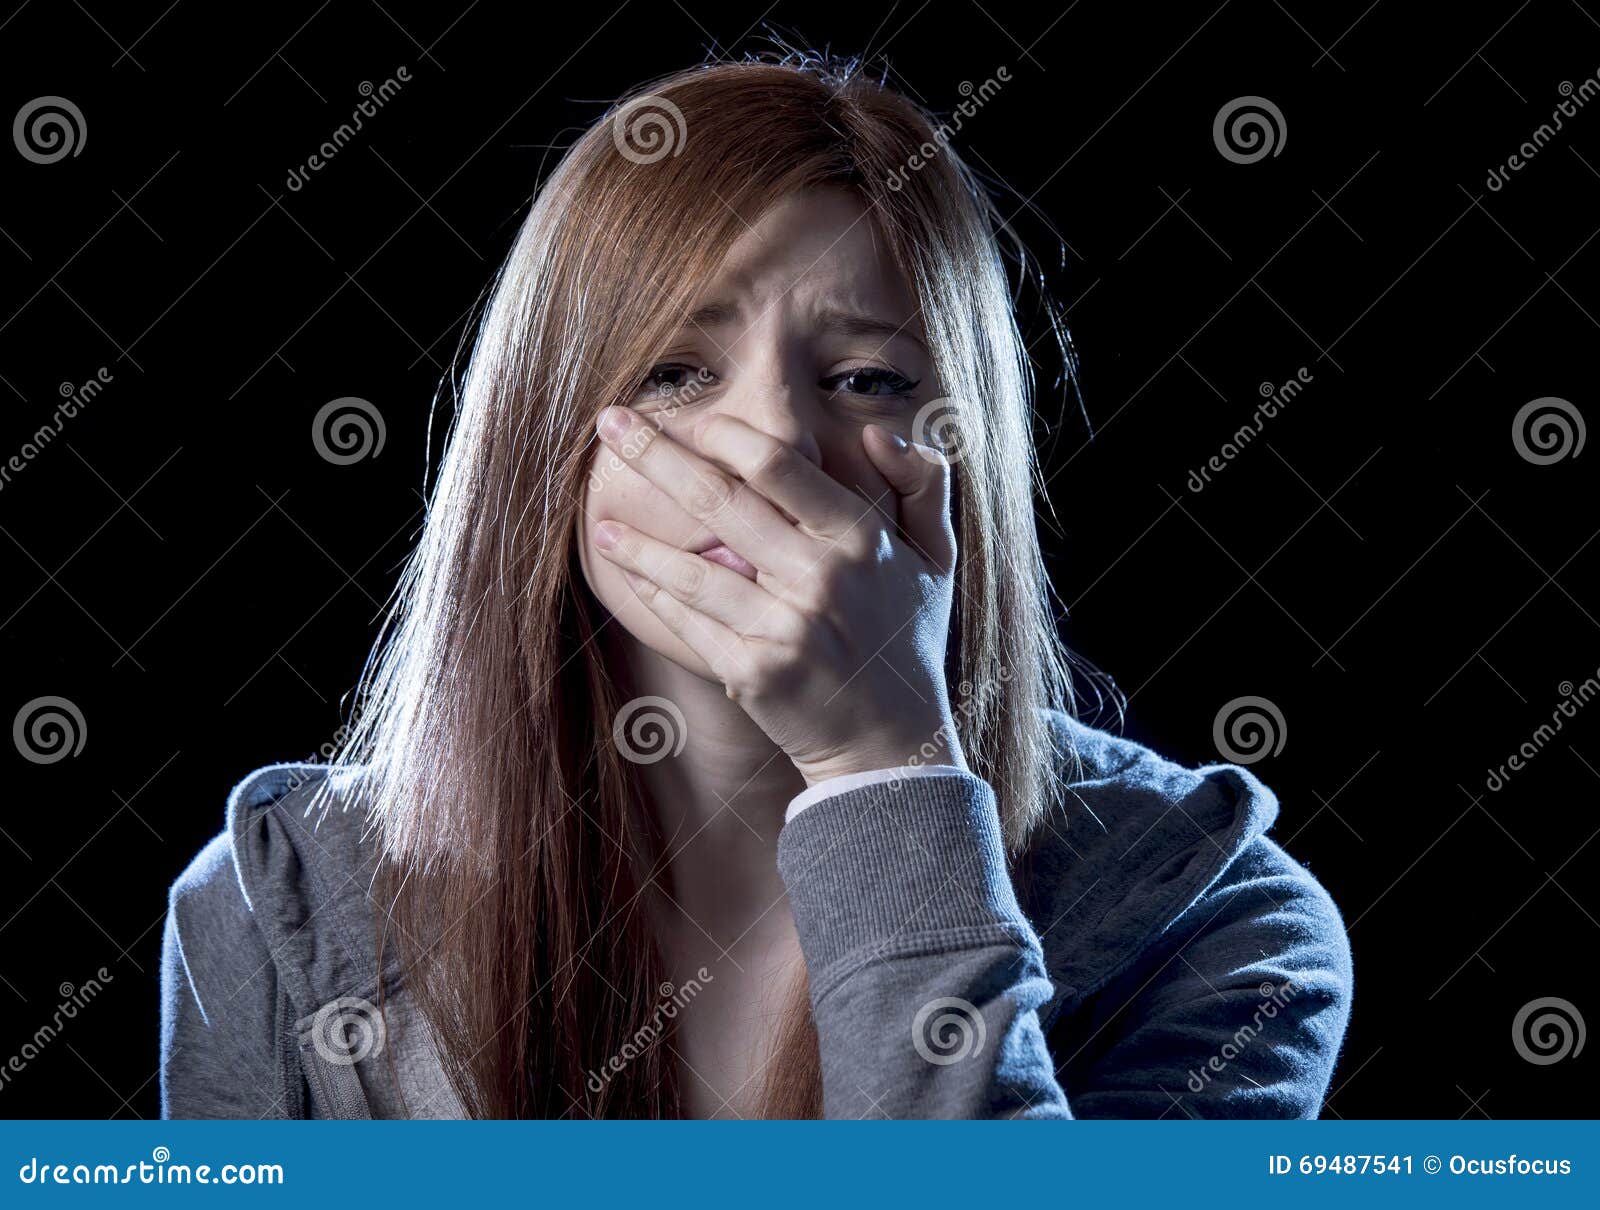 teenager girl in stress and pain suffering depression sad and scared in fear face expression